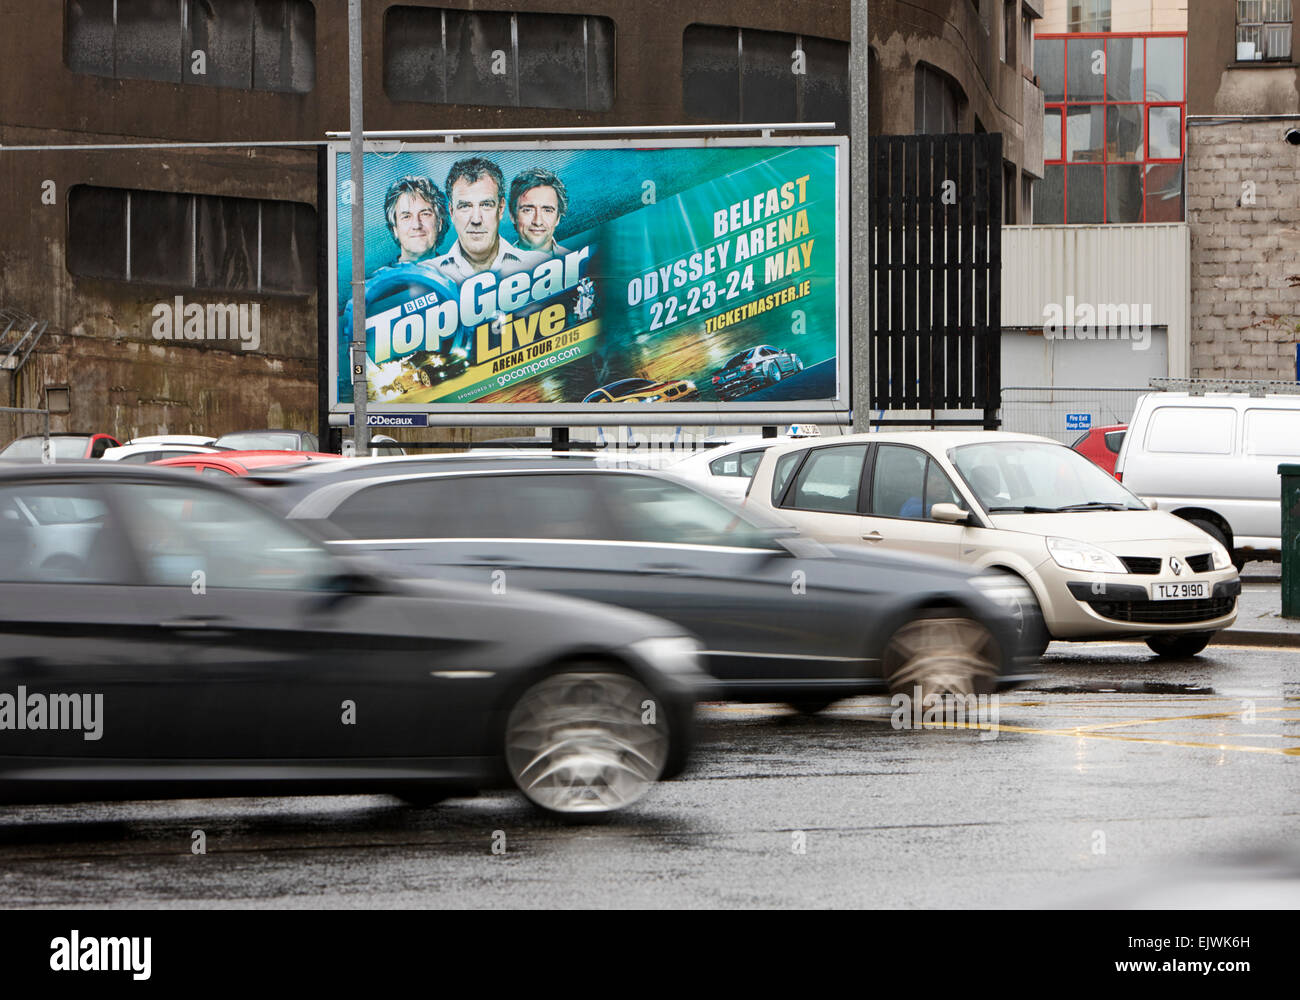 Belfast, Northern Ireland. 01st Apr, 2015. BBC TopGear live advertisement featuring Jeremy Clarkson still on display in Central Belfast advertising their show in May 2015. Credit:  Radharc Images/Alamy Live News Stock Photo